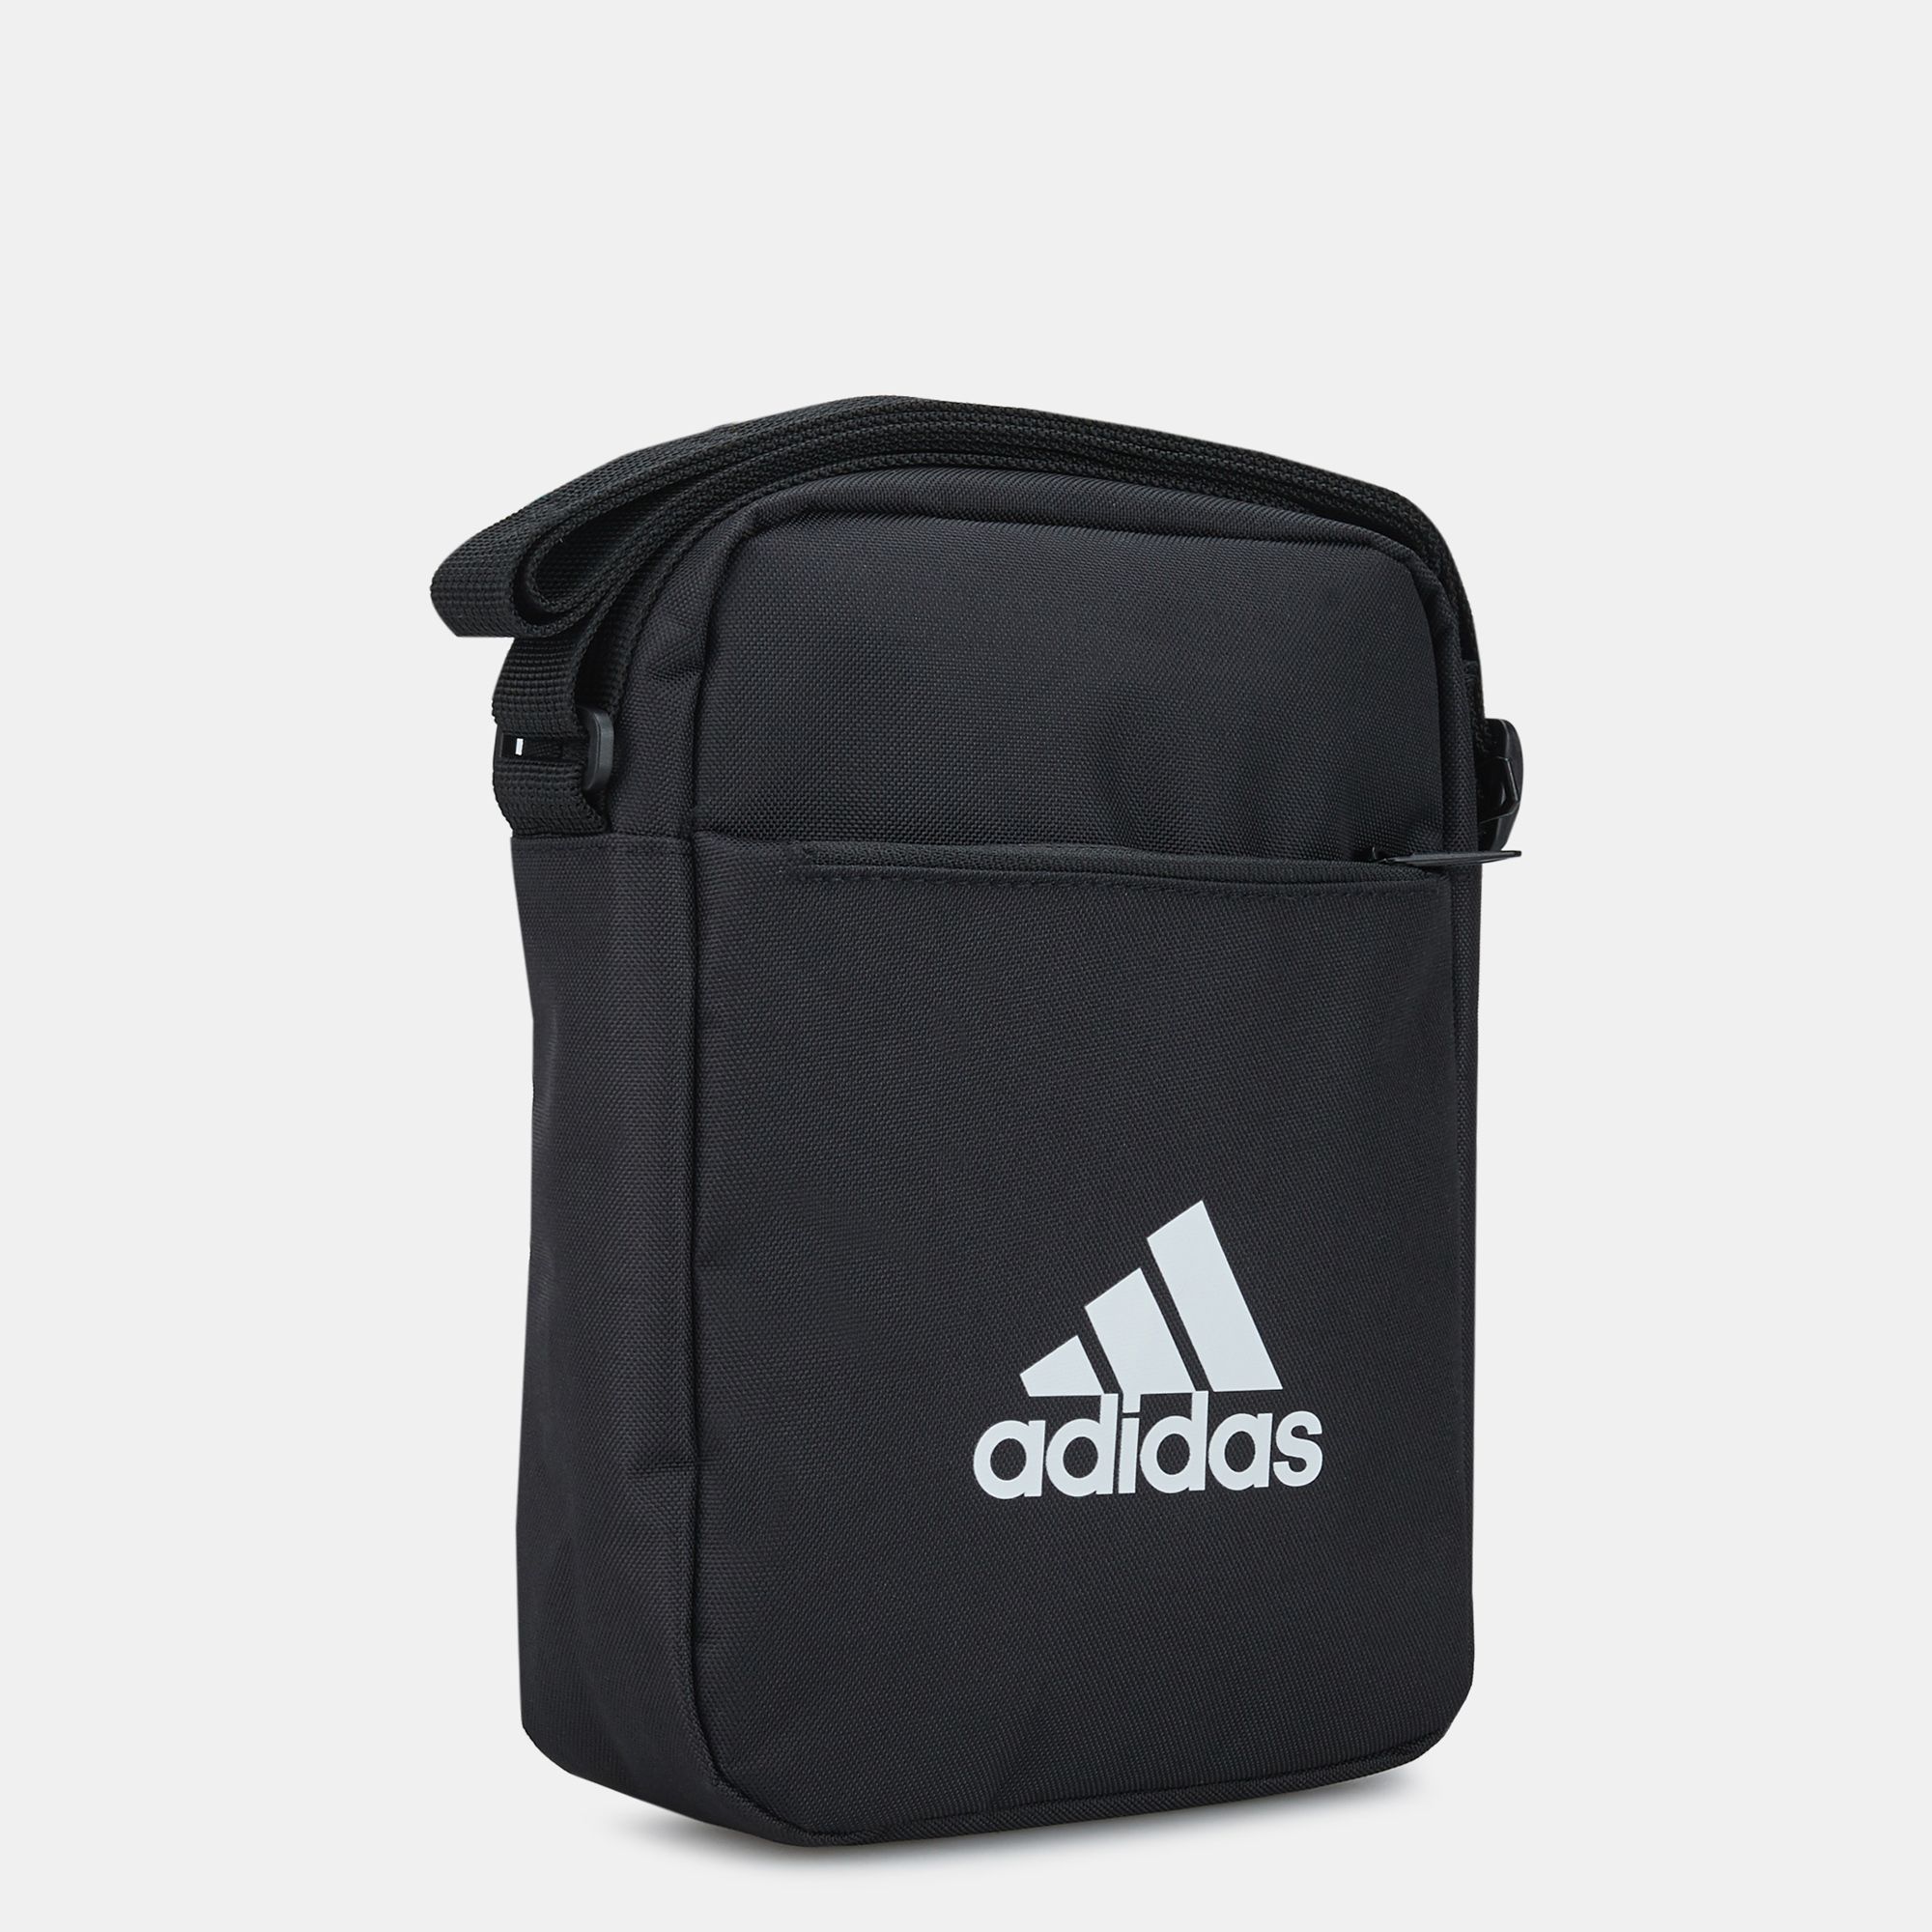 adidas Crossbody Bag | Pouches | Bags and Luggage | Accessories ...